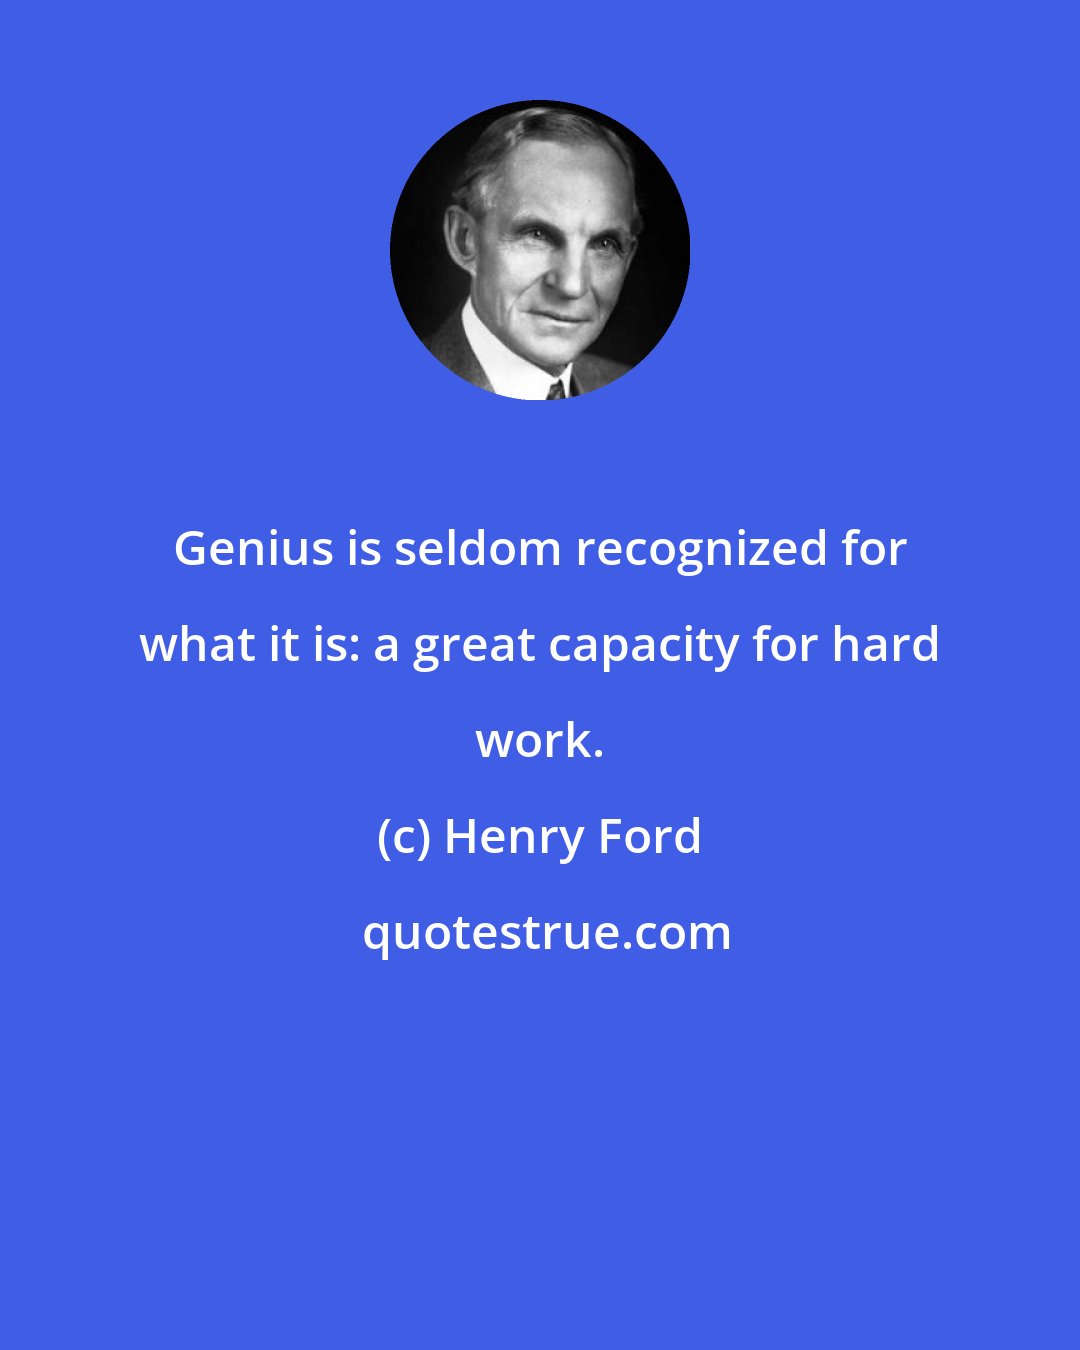 Henry Ford: Genius is seldom recognized for what it is: a great capacity for hard work.